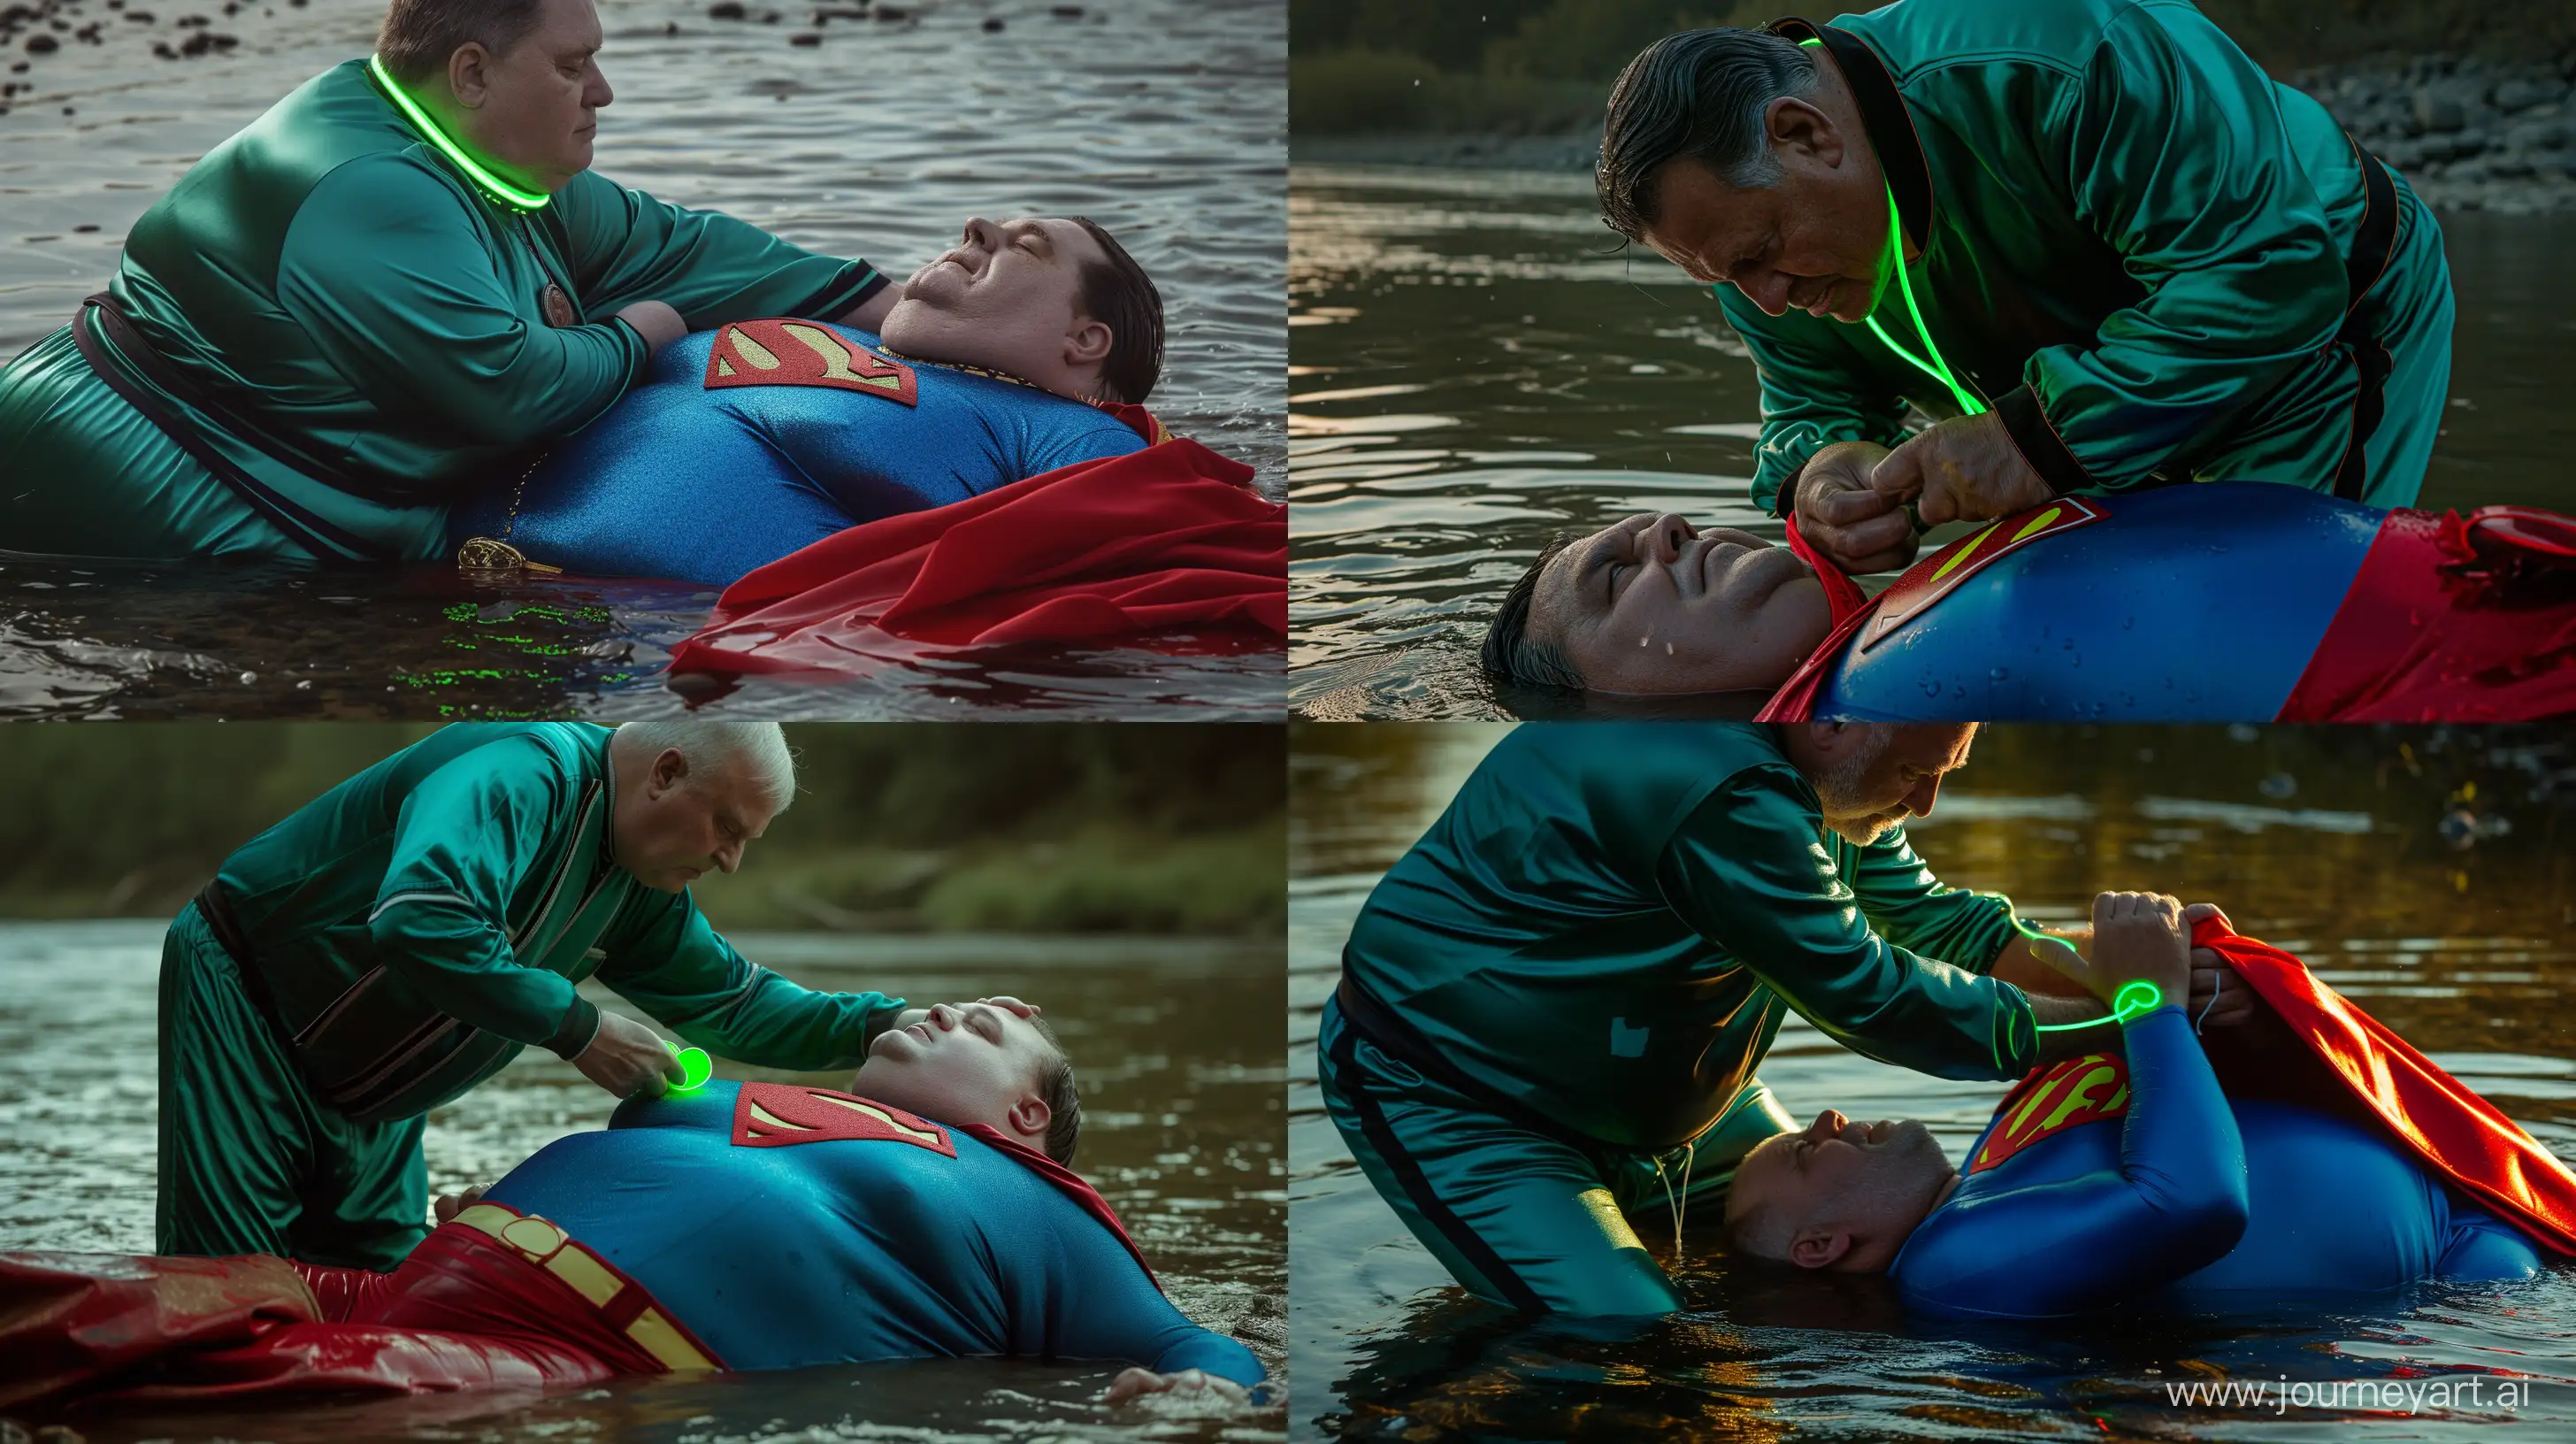 Close-up photo of a 100 kg man aged 60 wearing a silk green emerald tracksuit with a black stripe on the pants. He is tightening a tight green glowing neon dog collar on the neck of a fat man aged 60 wearing a tight blue 1978 smooth superman costume with a red cape lying on his face in the water. Natural Light. River. --style raw --ar 16:9